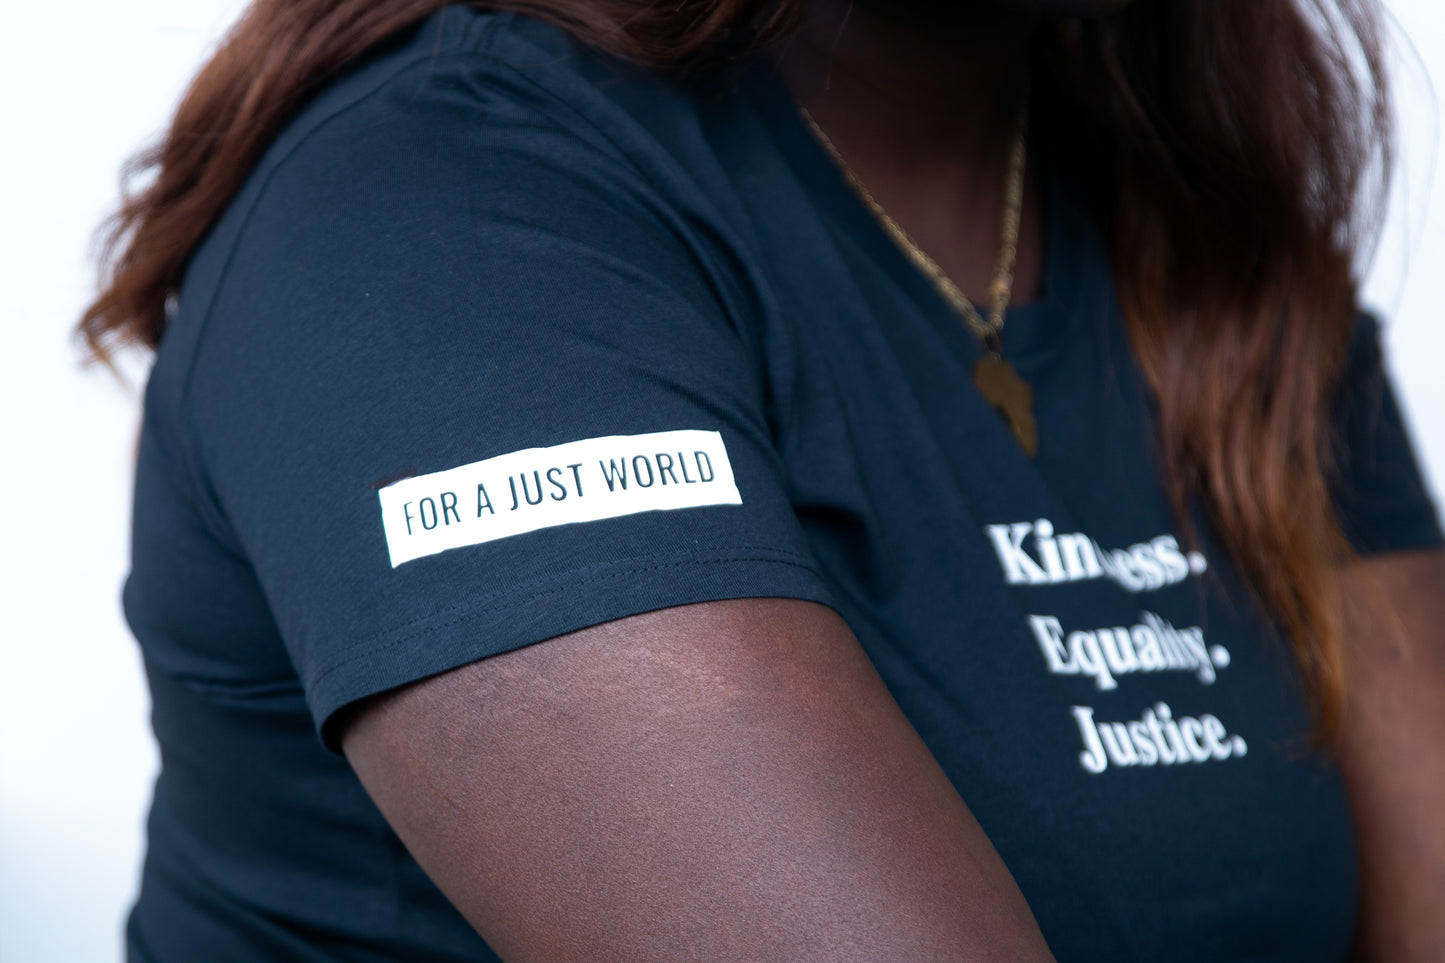 Kindness Equality Justice . Fitted Tee